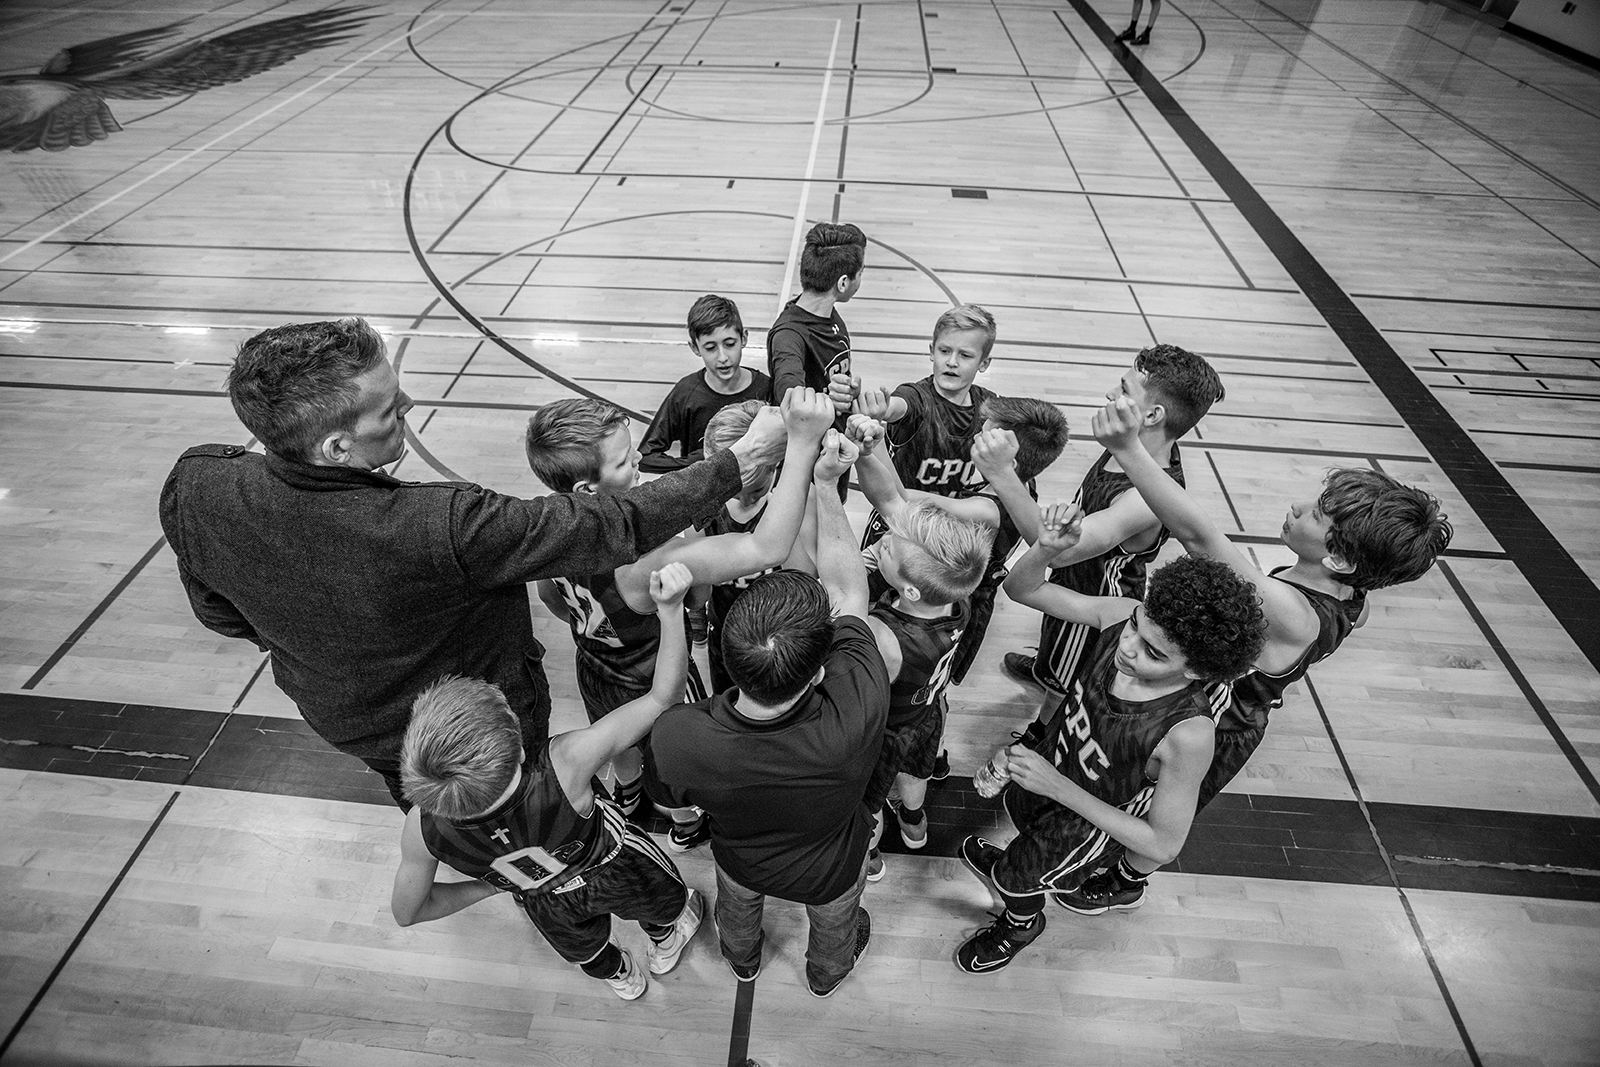 A basketball coach puts hands together with team in black and white